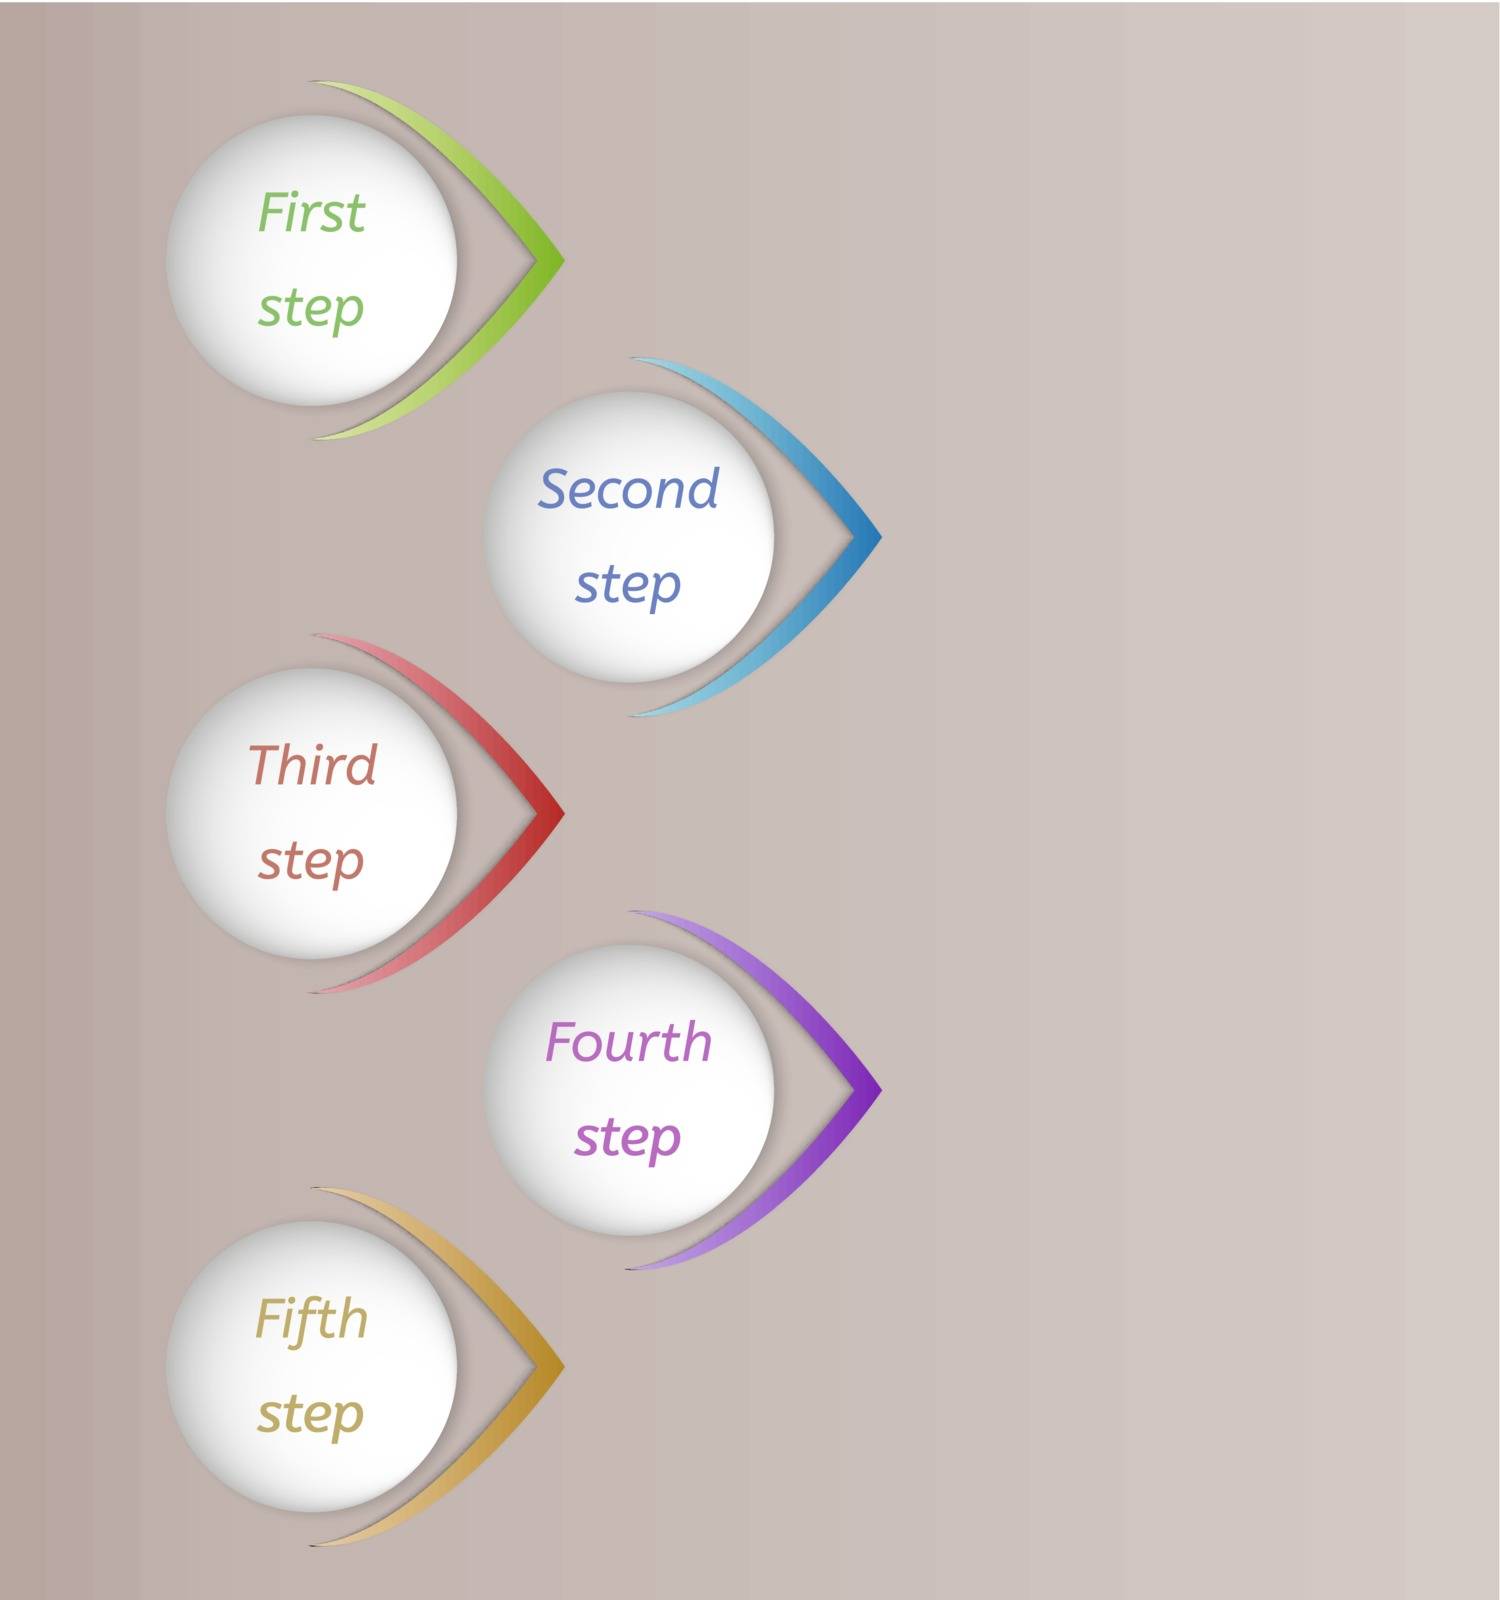 five color steps connected with color dashed lines on beige gradient background